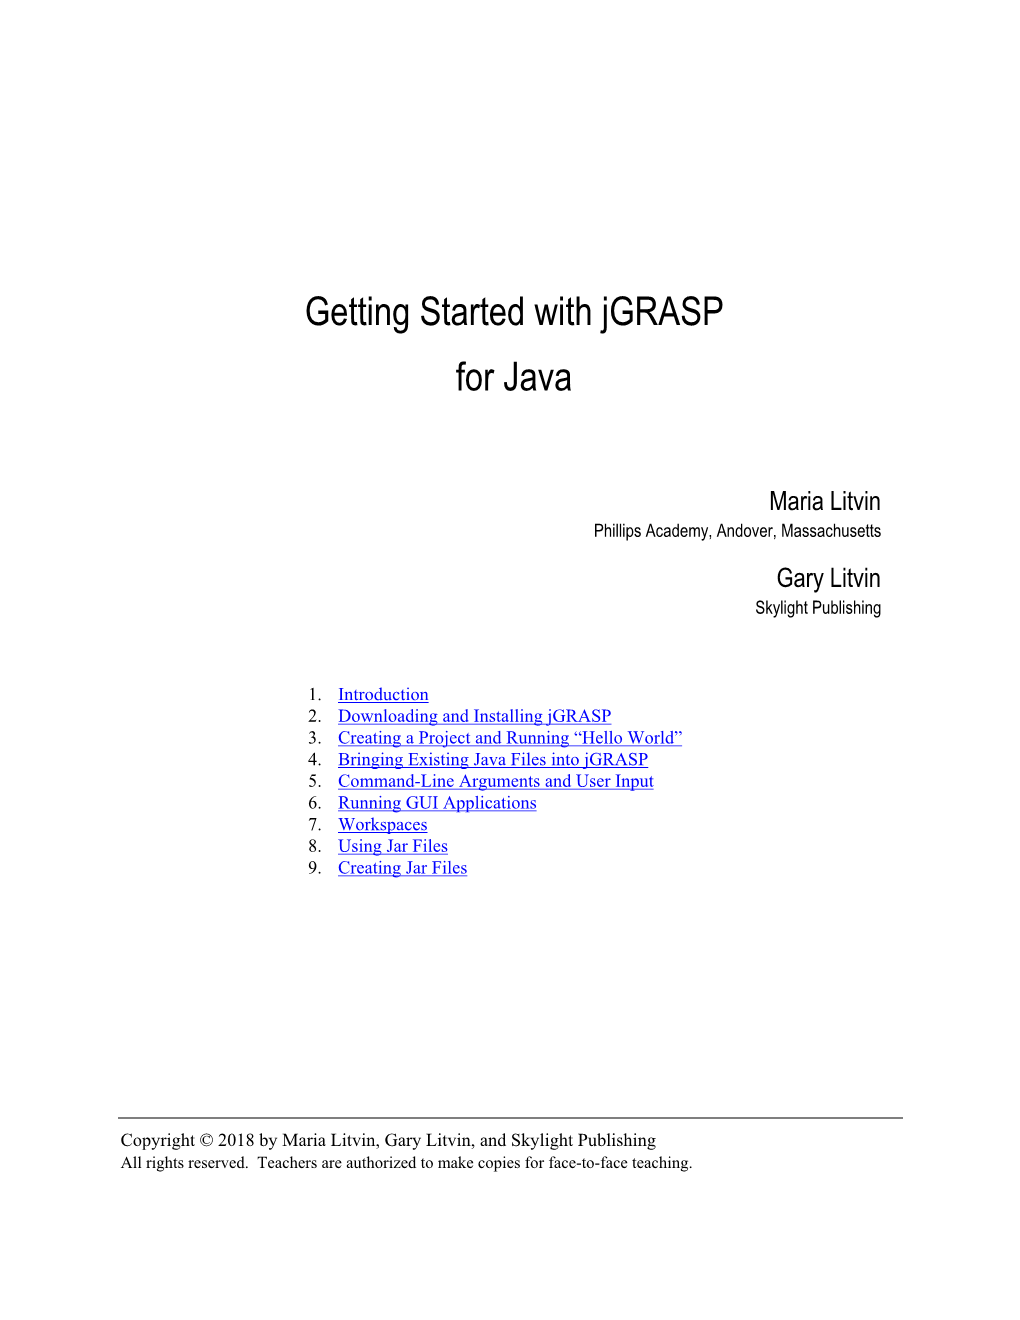 Getting Started with Jgrasp for Java